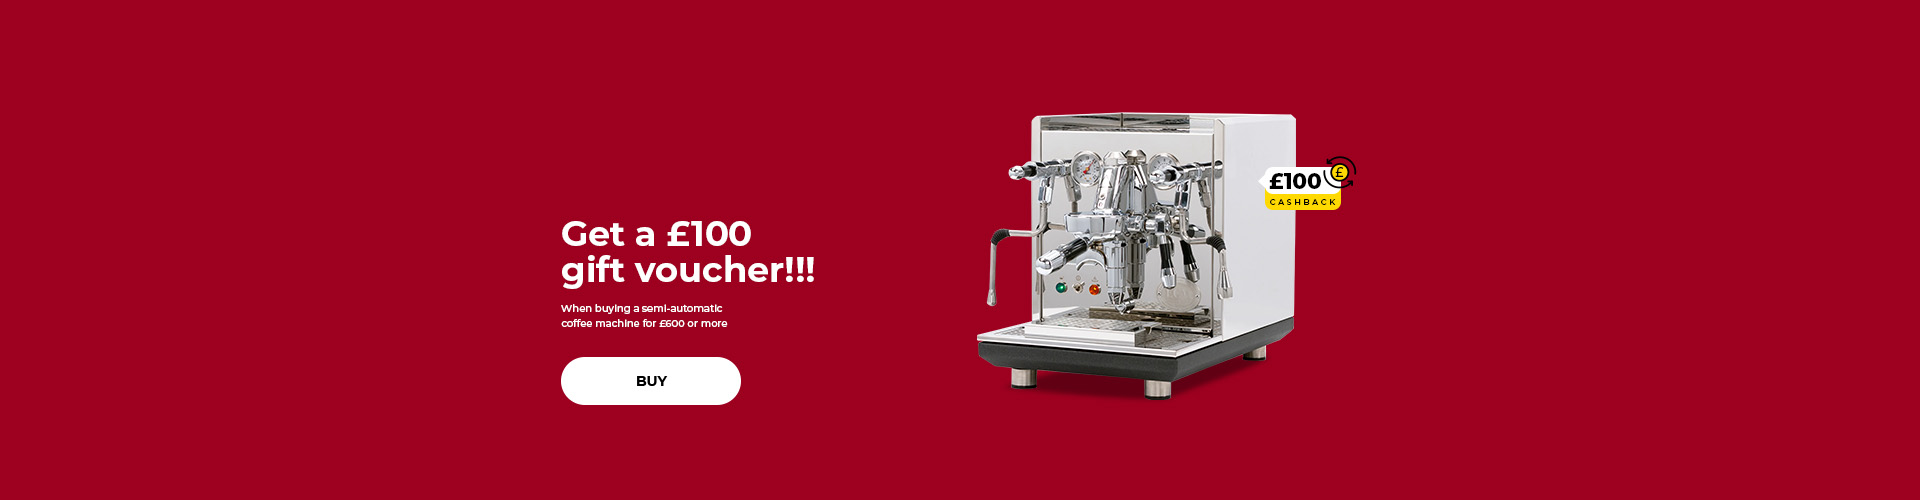 Get a £100 gift voucher!!! When buying a semi-automatic coffee machine for £600 or more